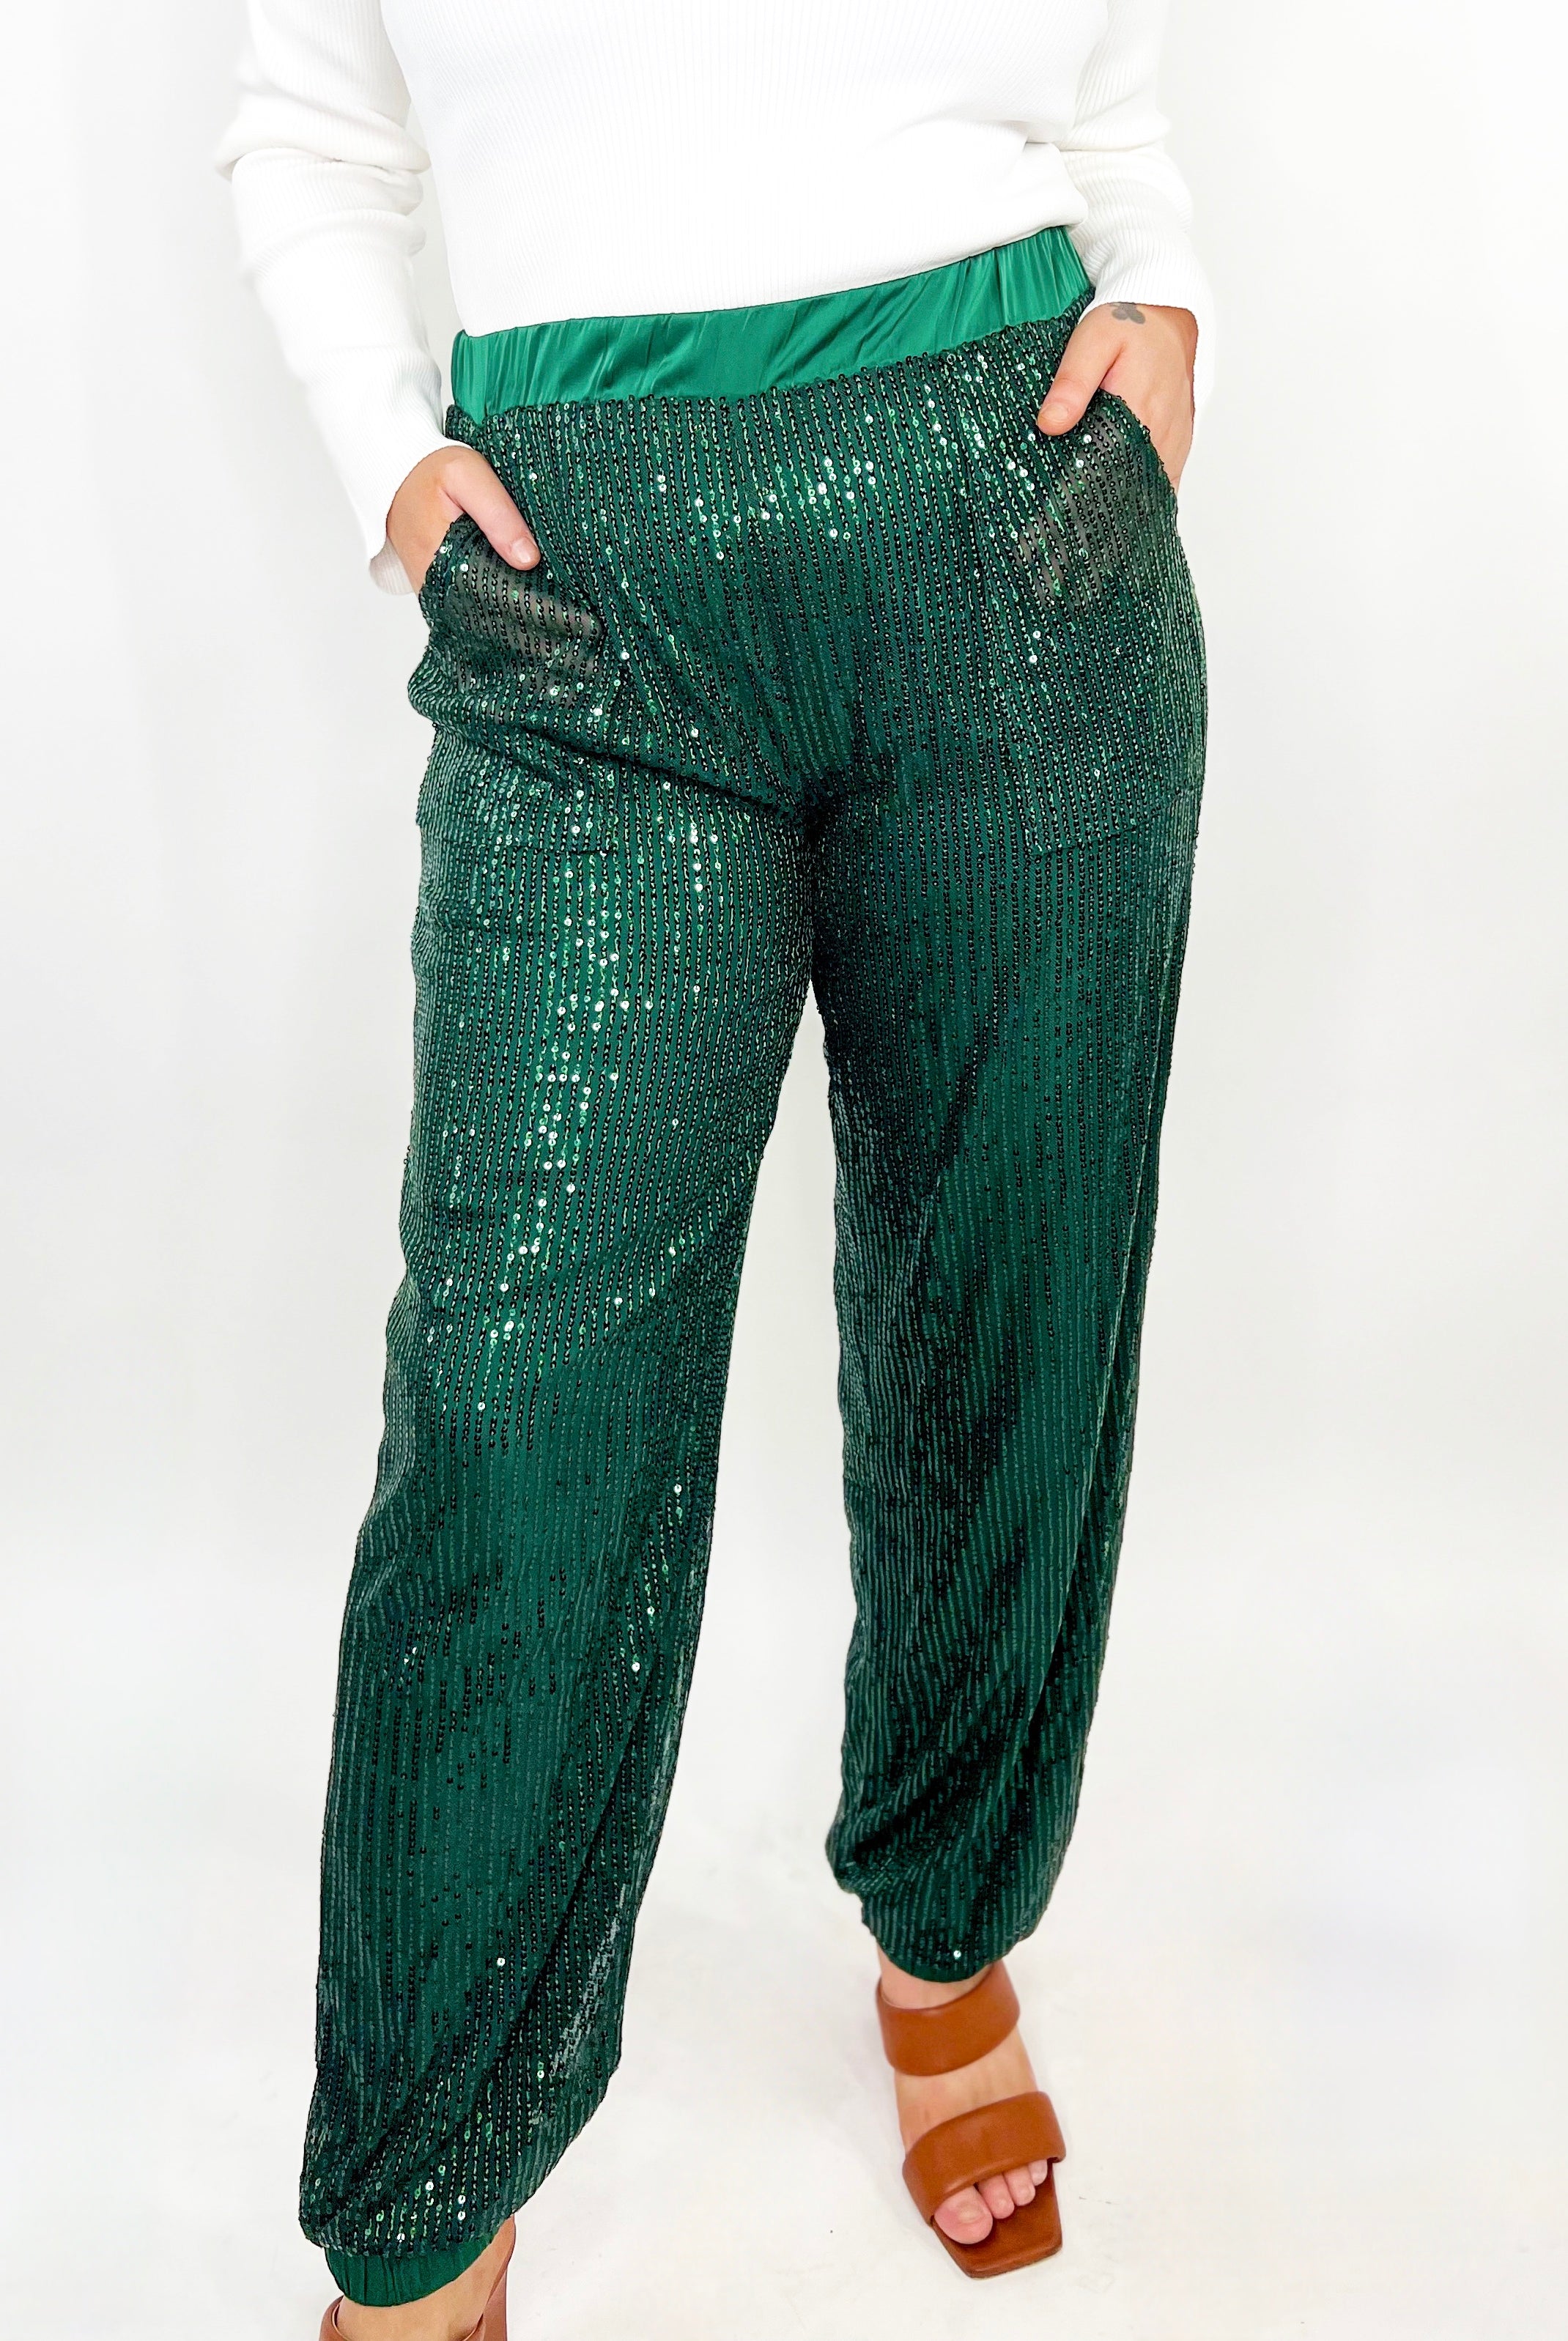 Party Pants-150 PANTS-Oddi-Heathered Boho Boutique, Women's Fashion and Accessories in Palmetto, FL